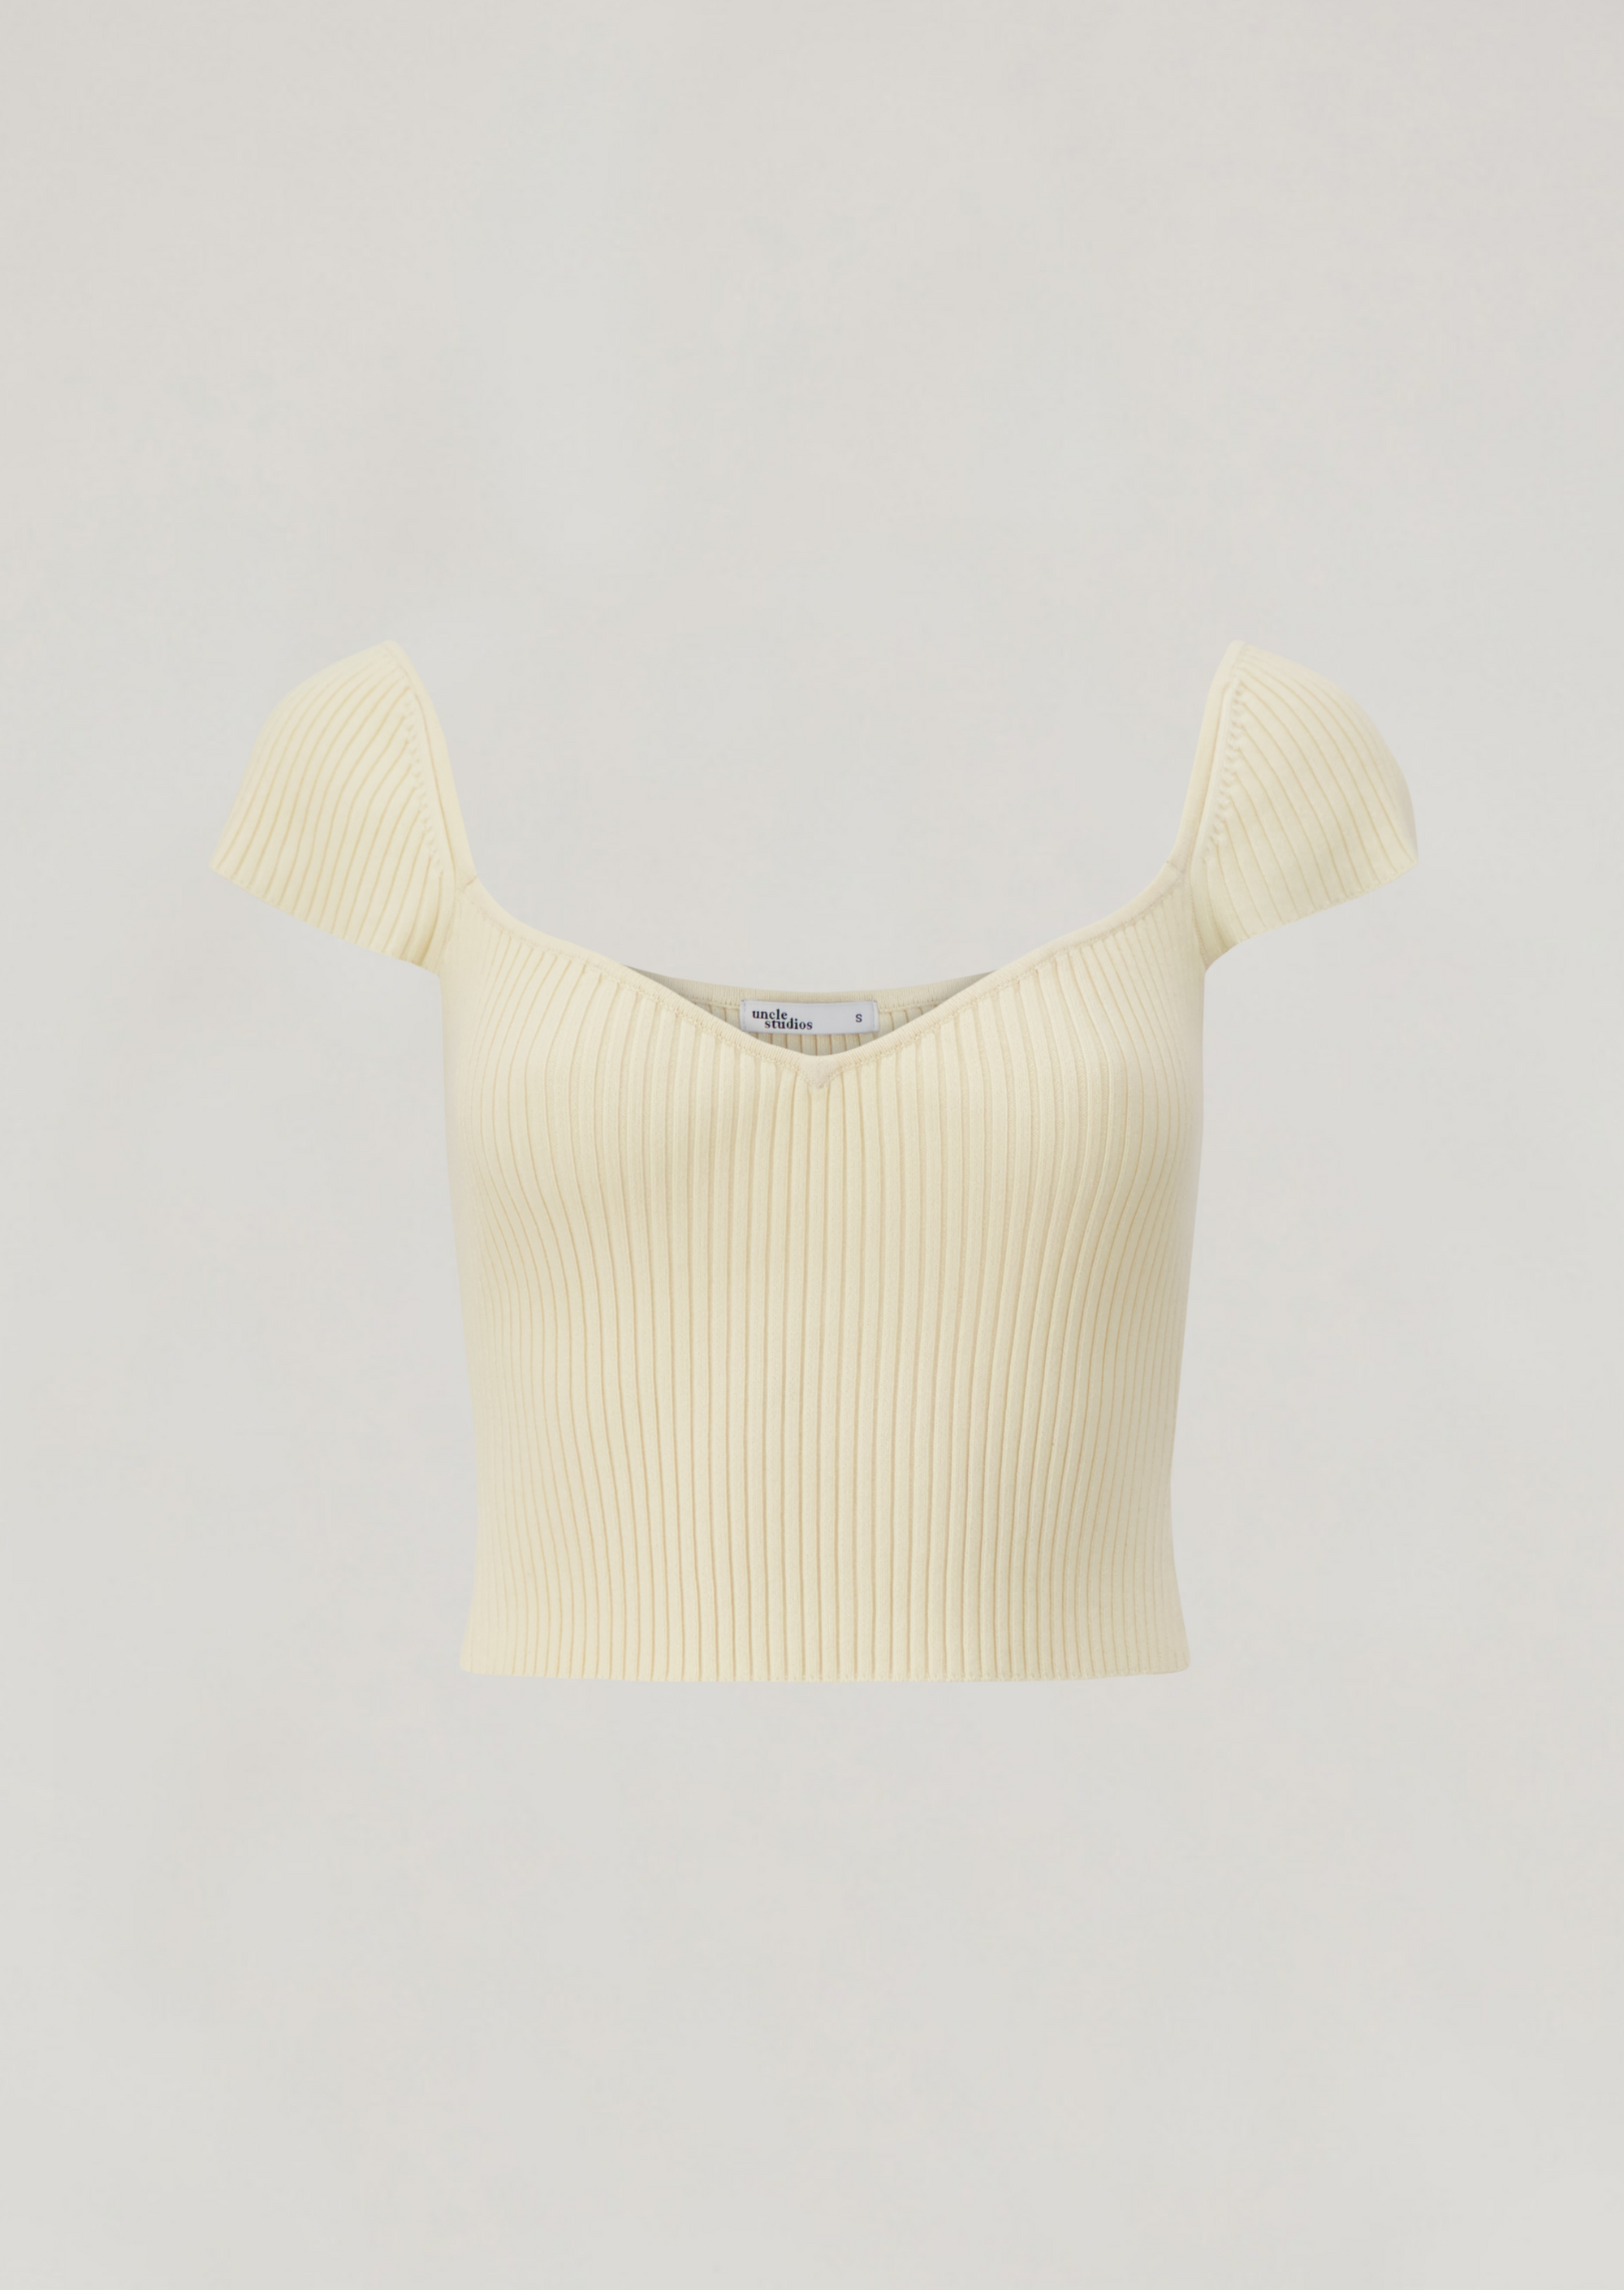 THE ARCHIVED SWEETHEART TOP